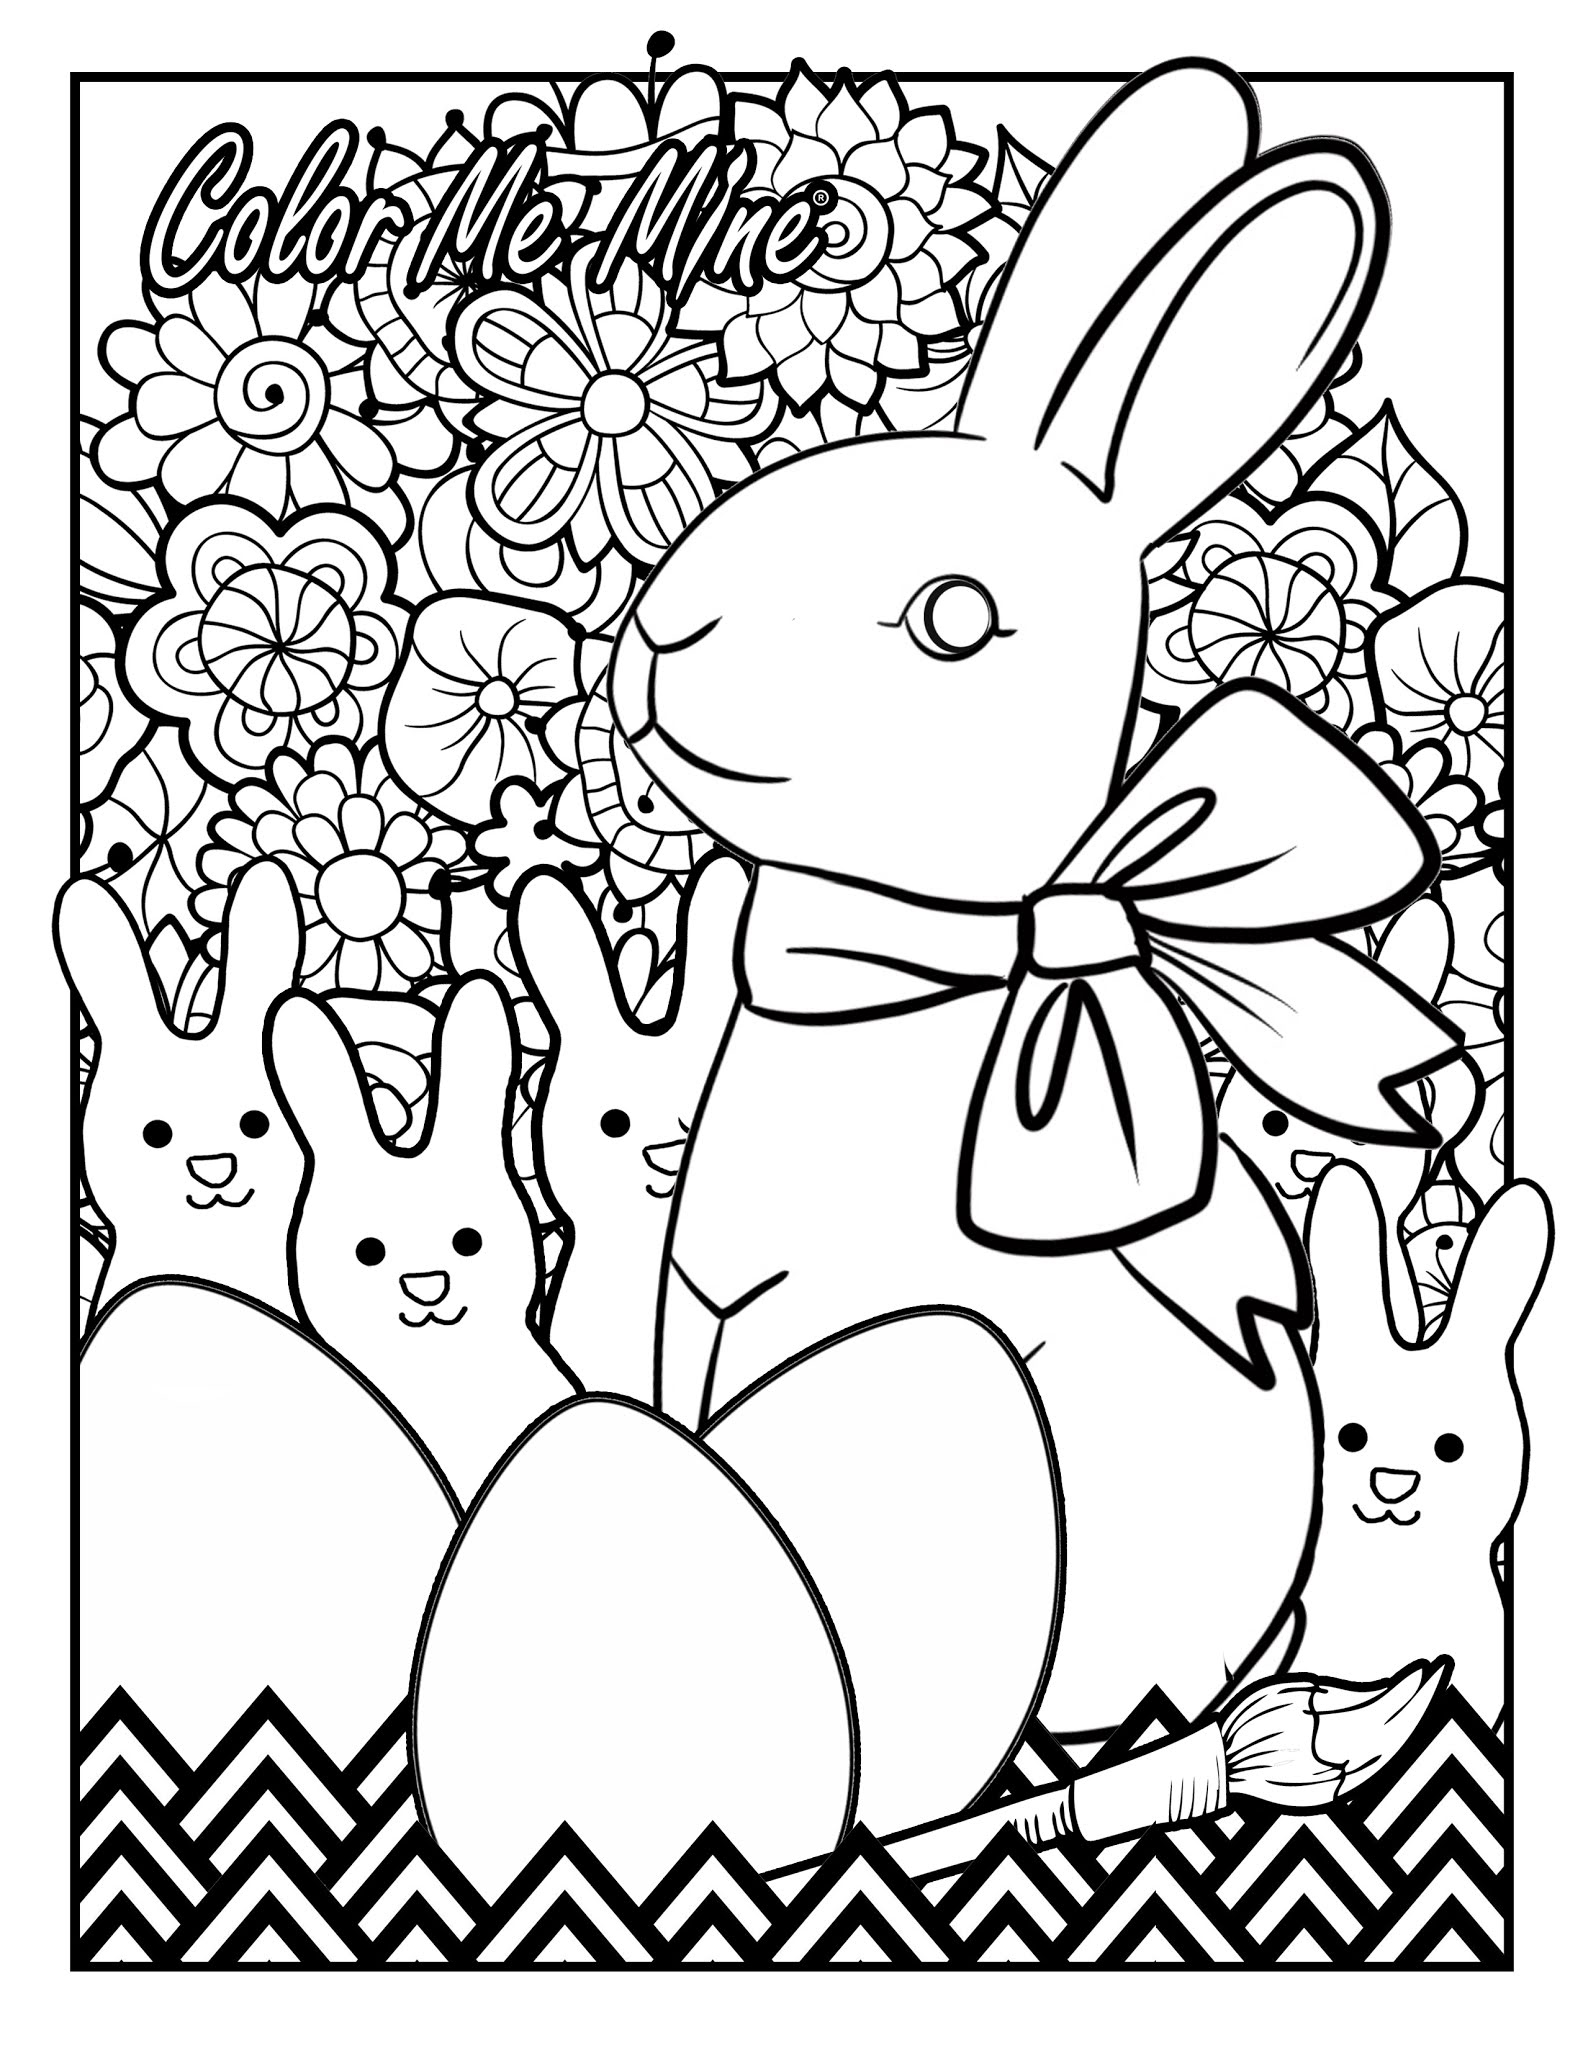 New Easter Coloring Page Color Me Mine